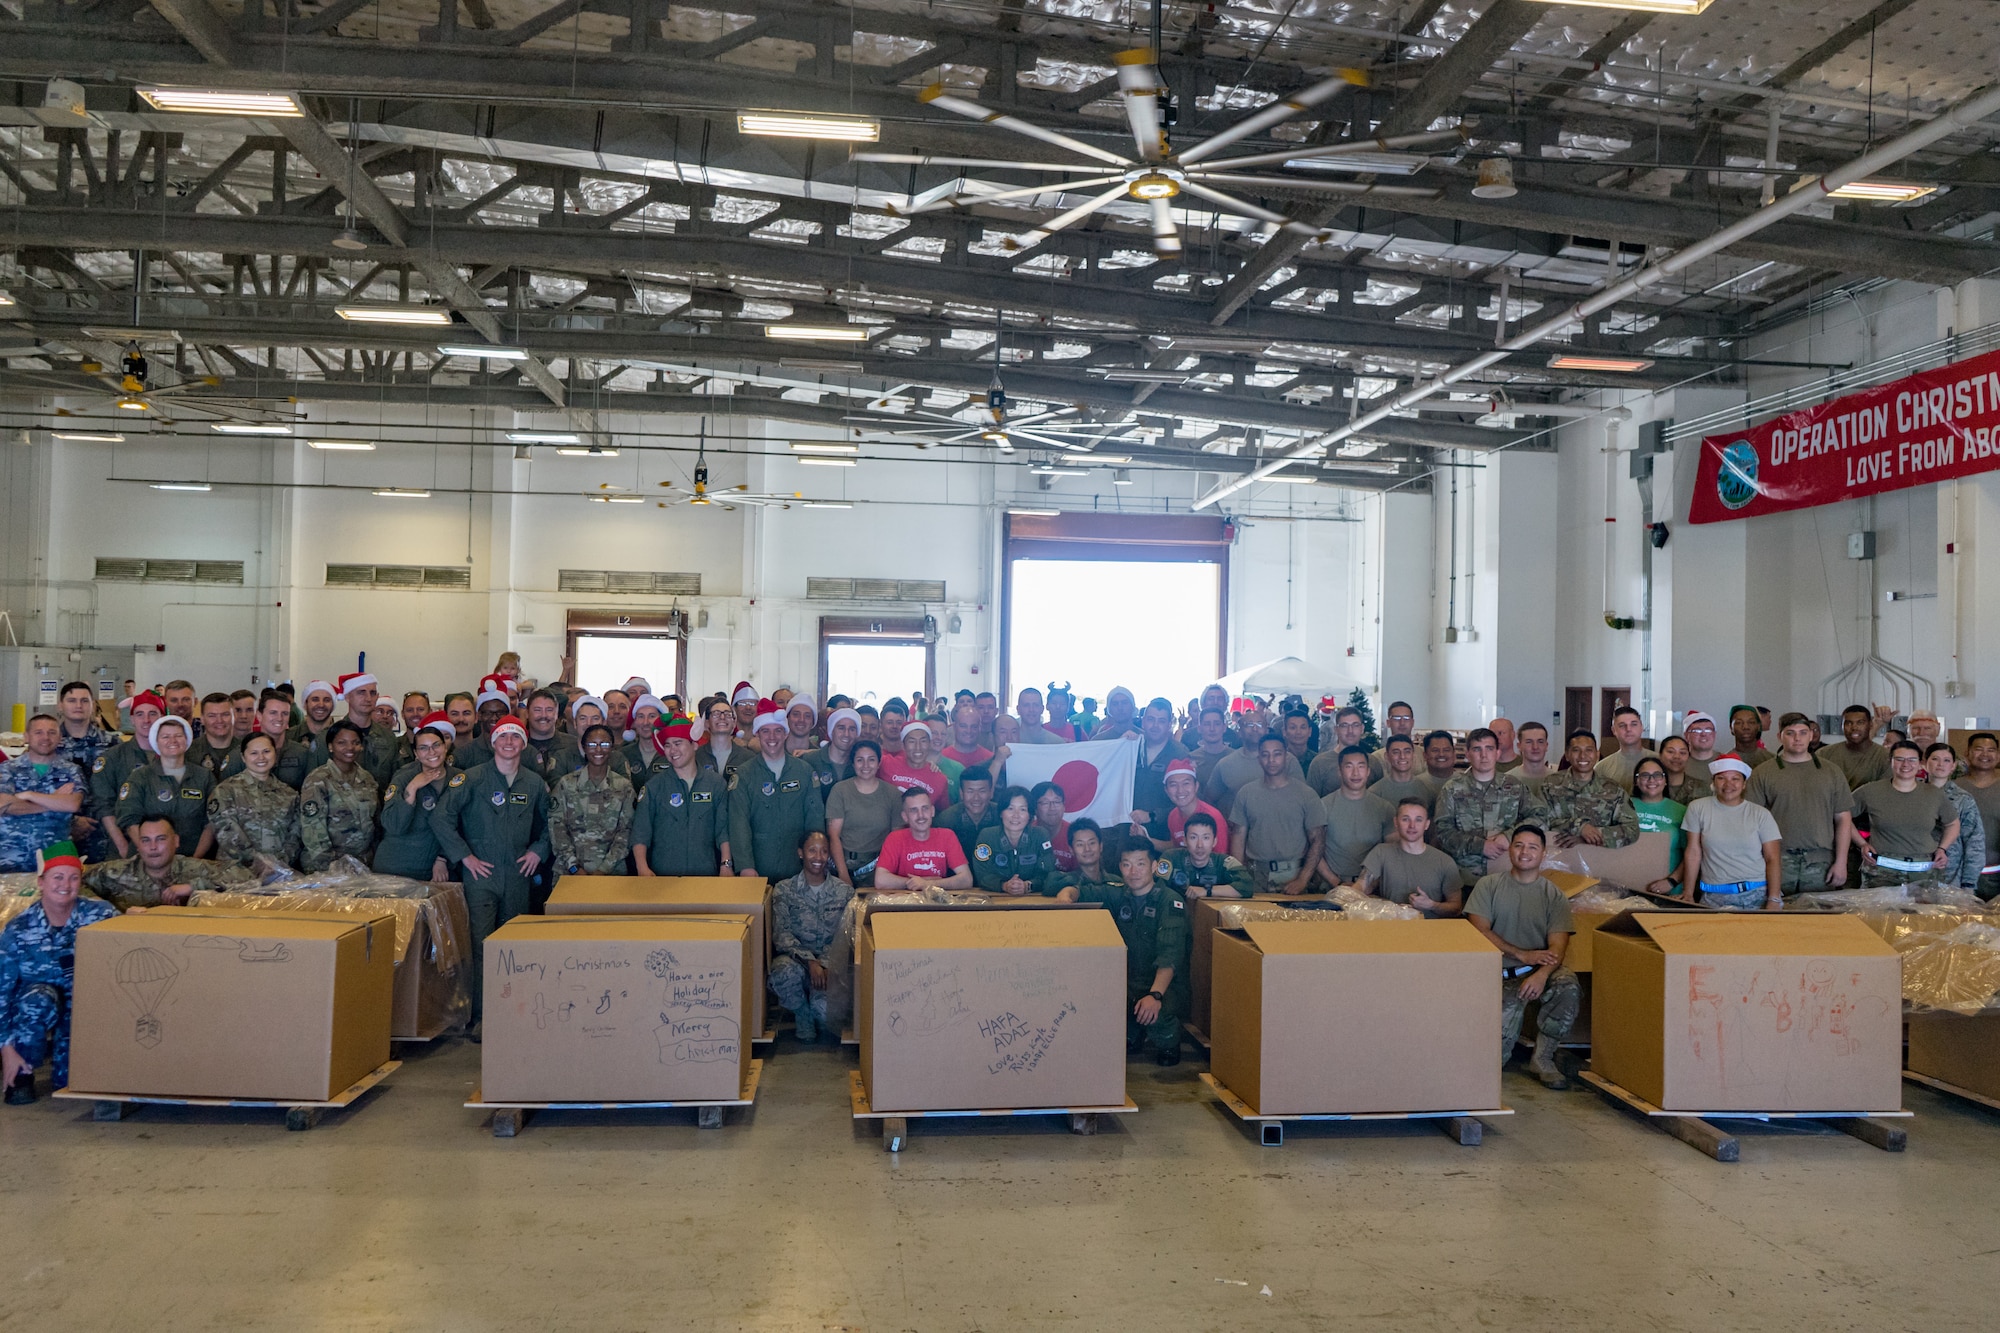 Operation Christmas Drop 2019 placed 176 bundles onto 56 Micronesian islands across the Pacific